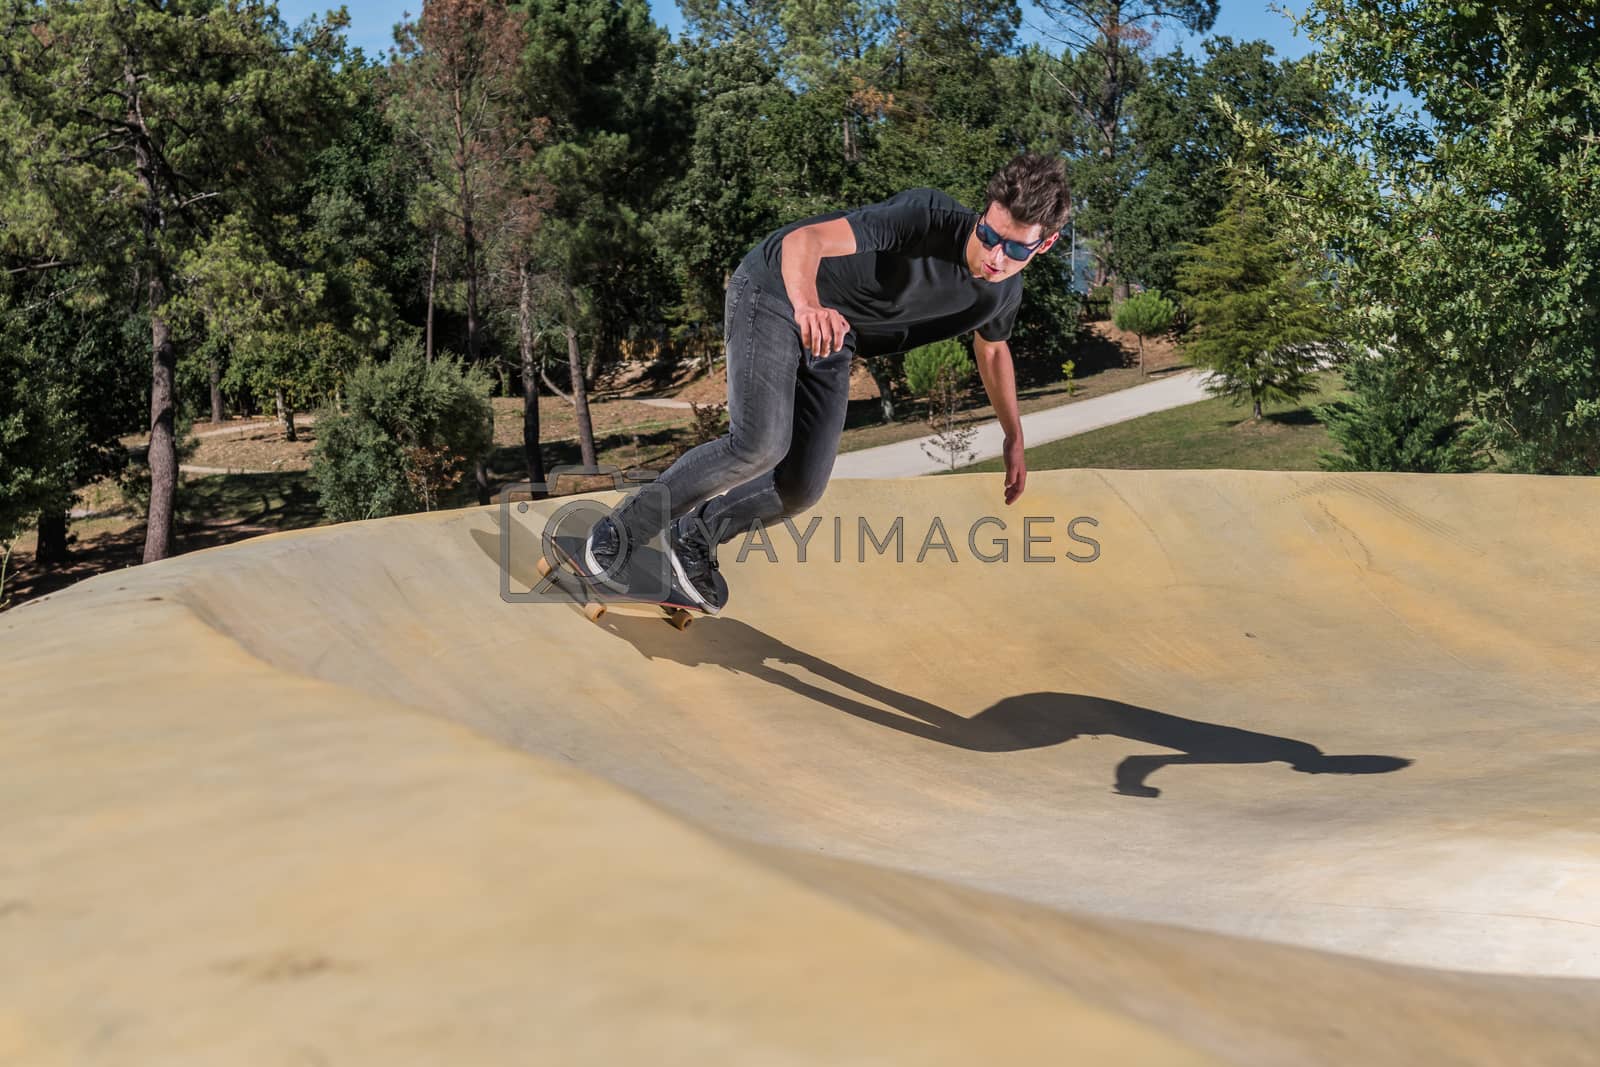 Royalty free image of Skateboarder on a pump track park by homydesign